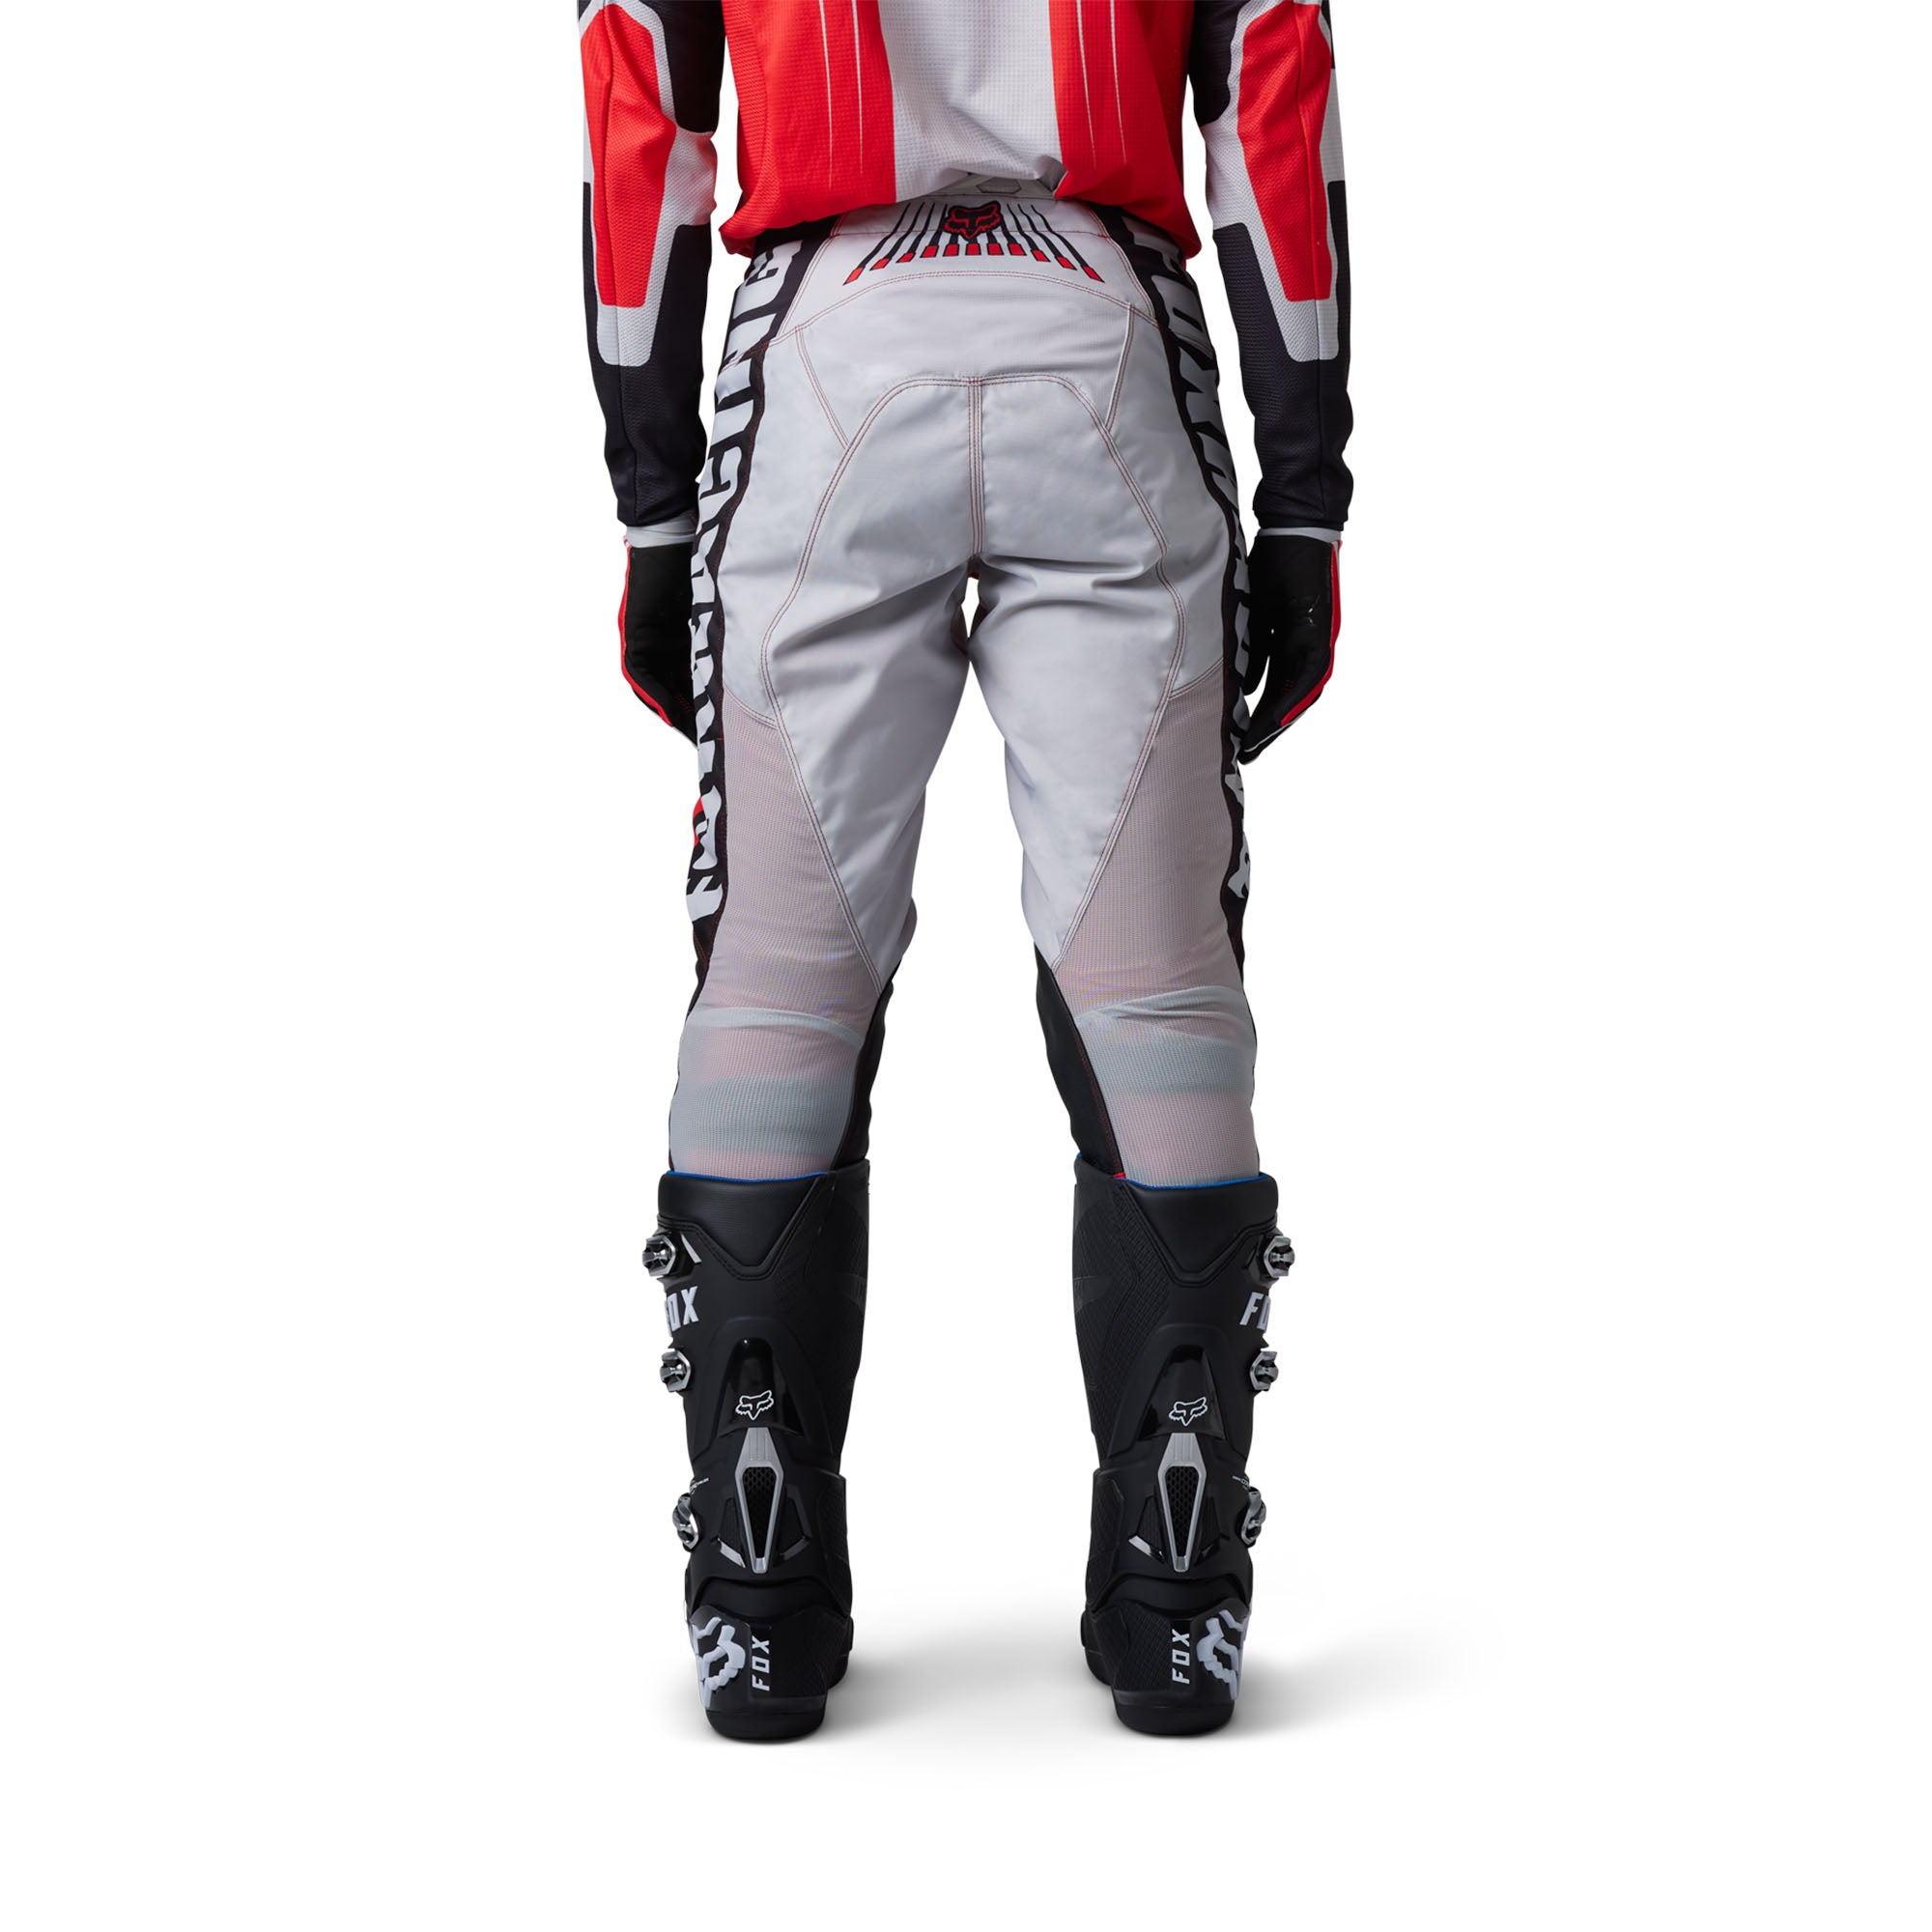 Fox Racing 180 Youth GOAT Strafer Pants